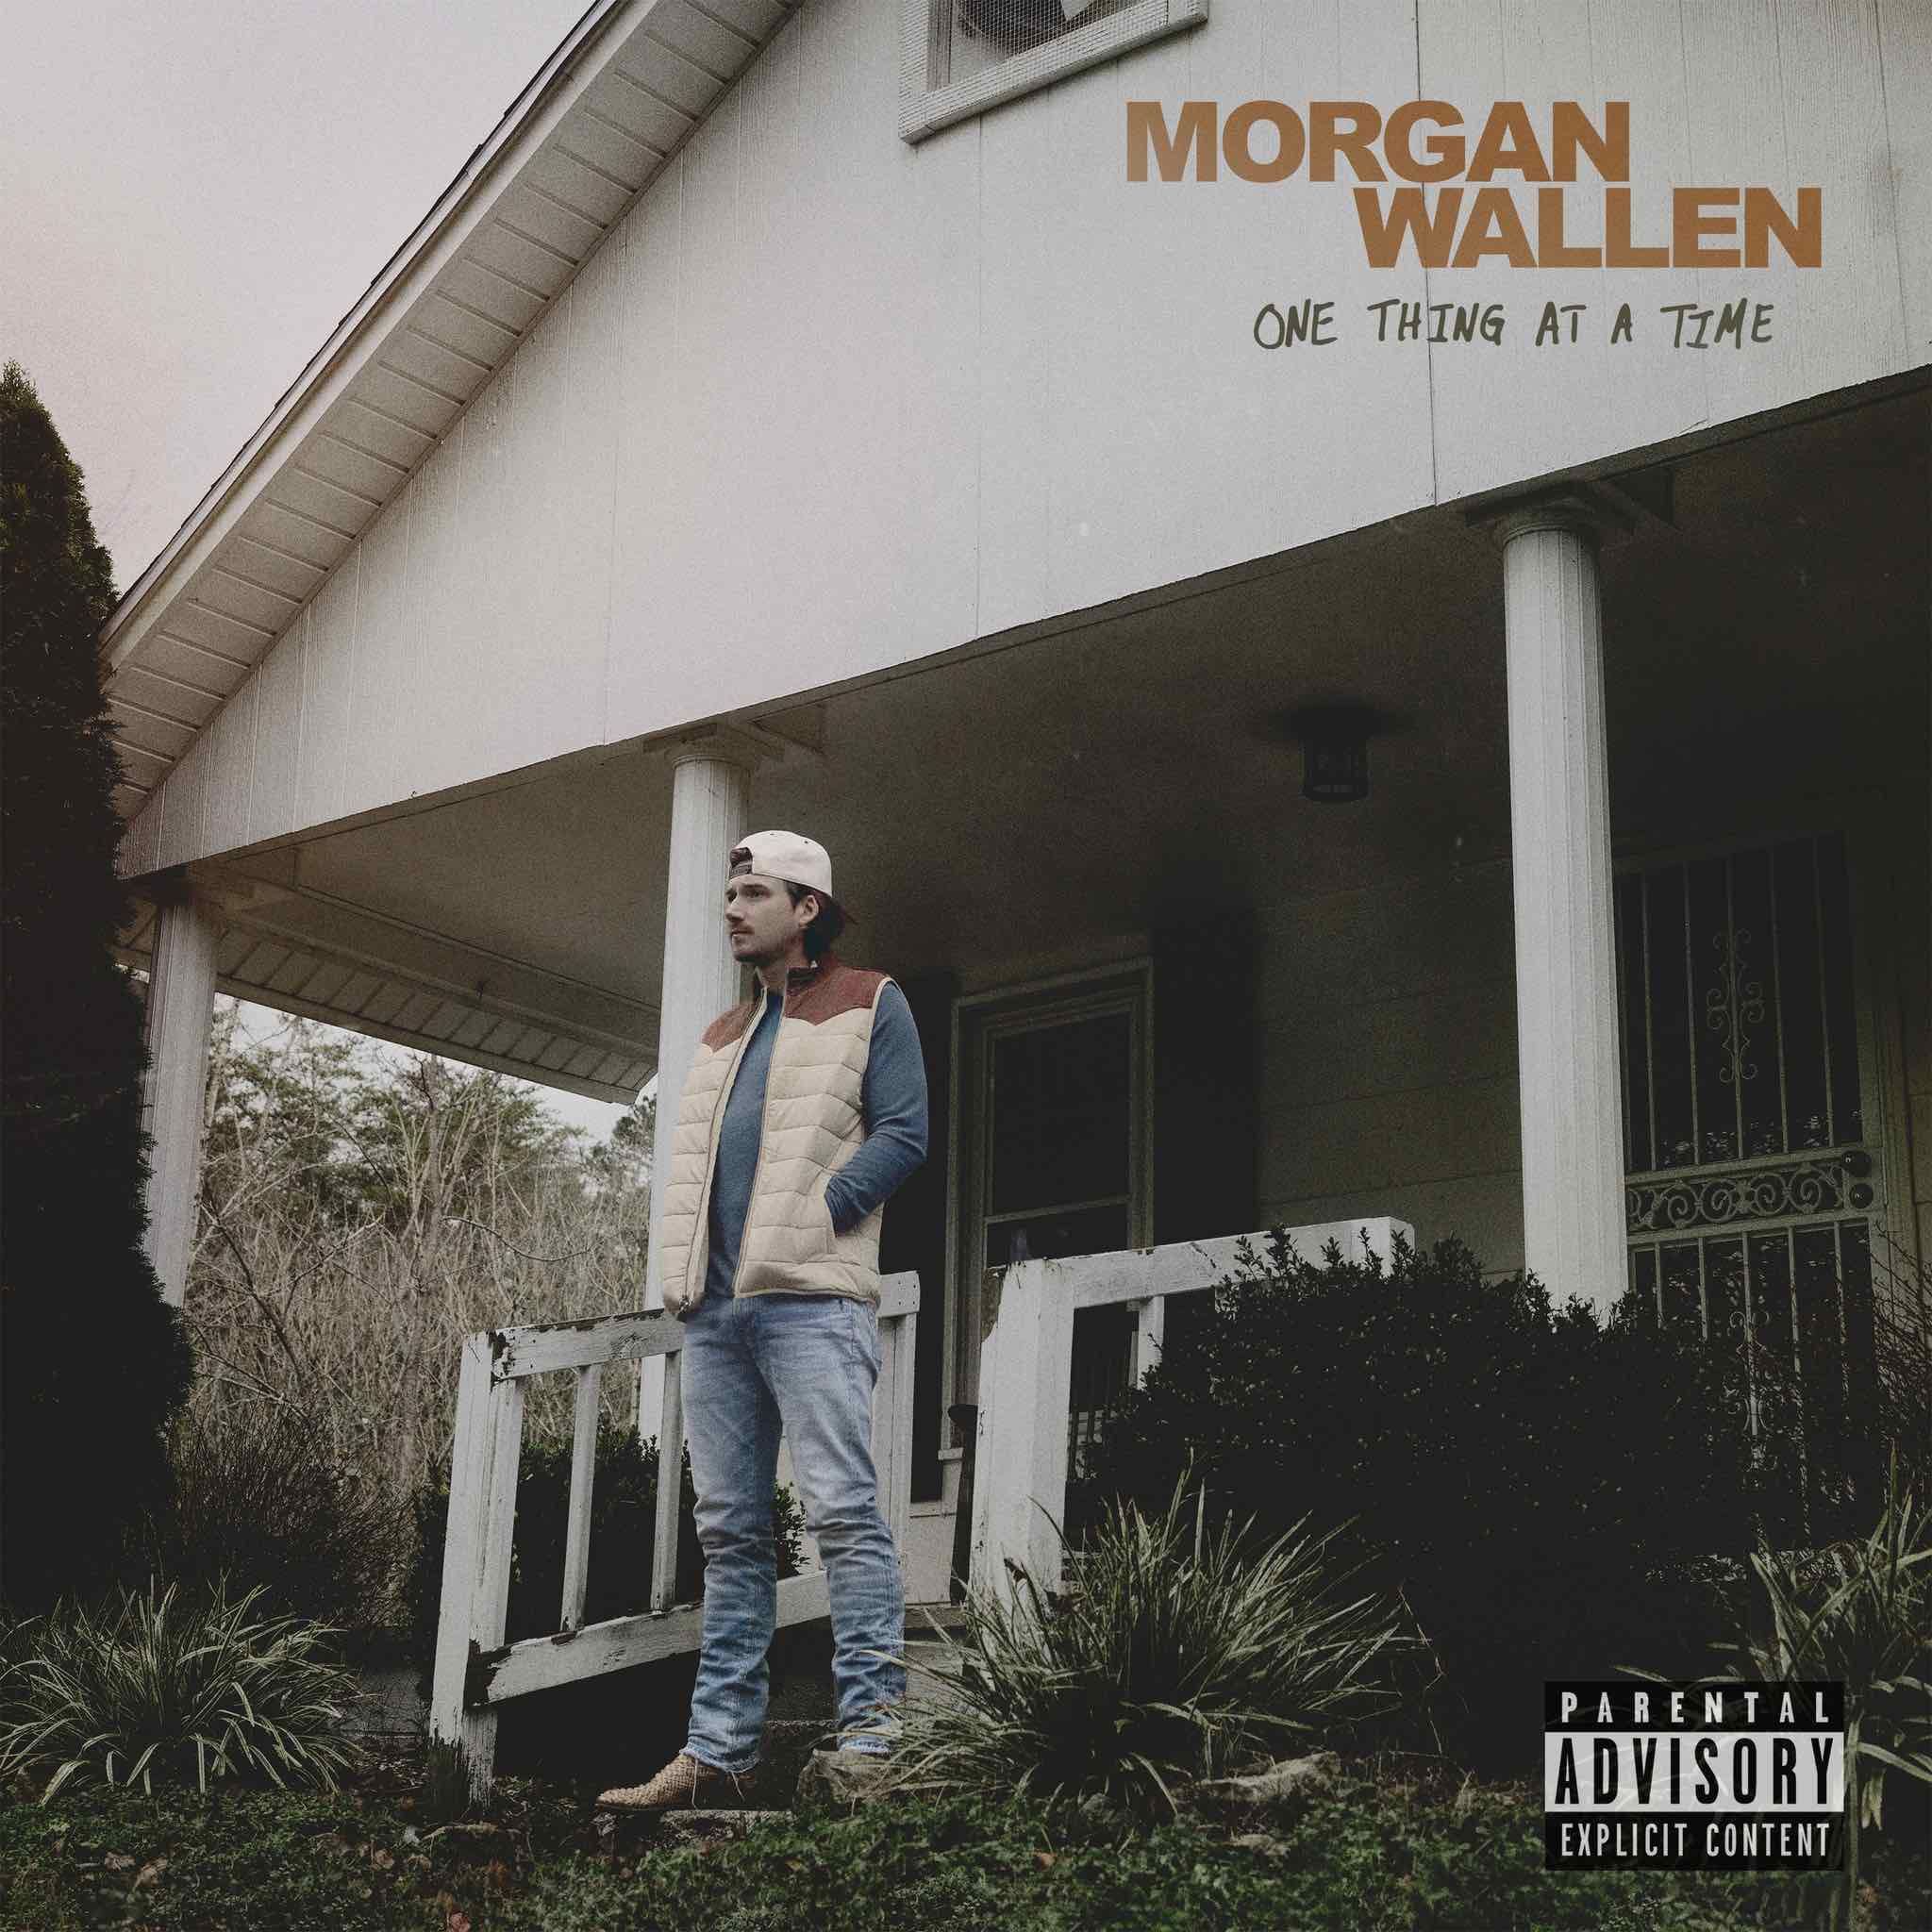 Morgan Wallen - One Thing At A Time Album Cover